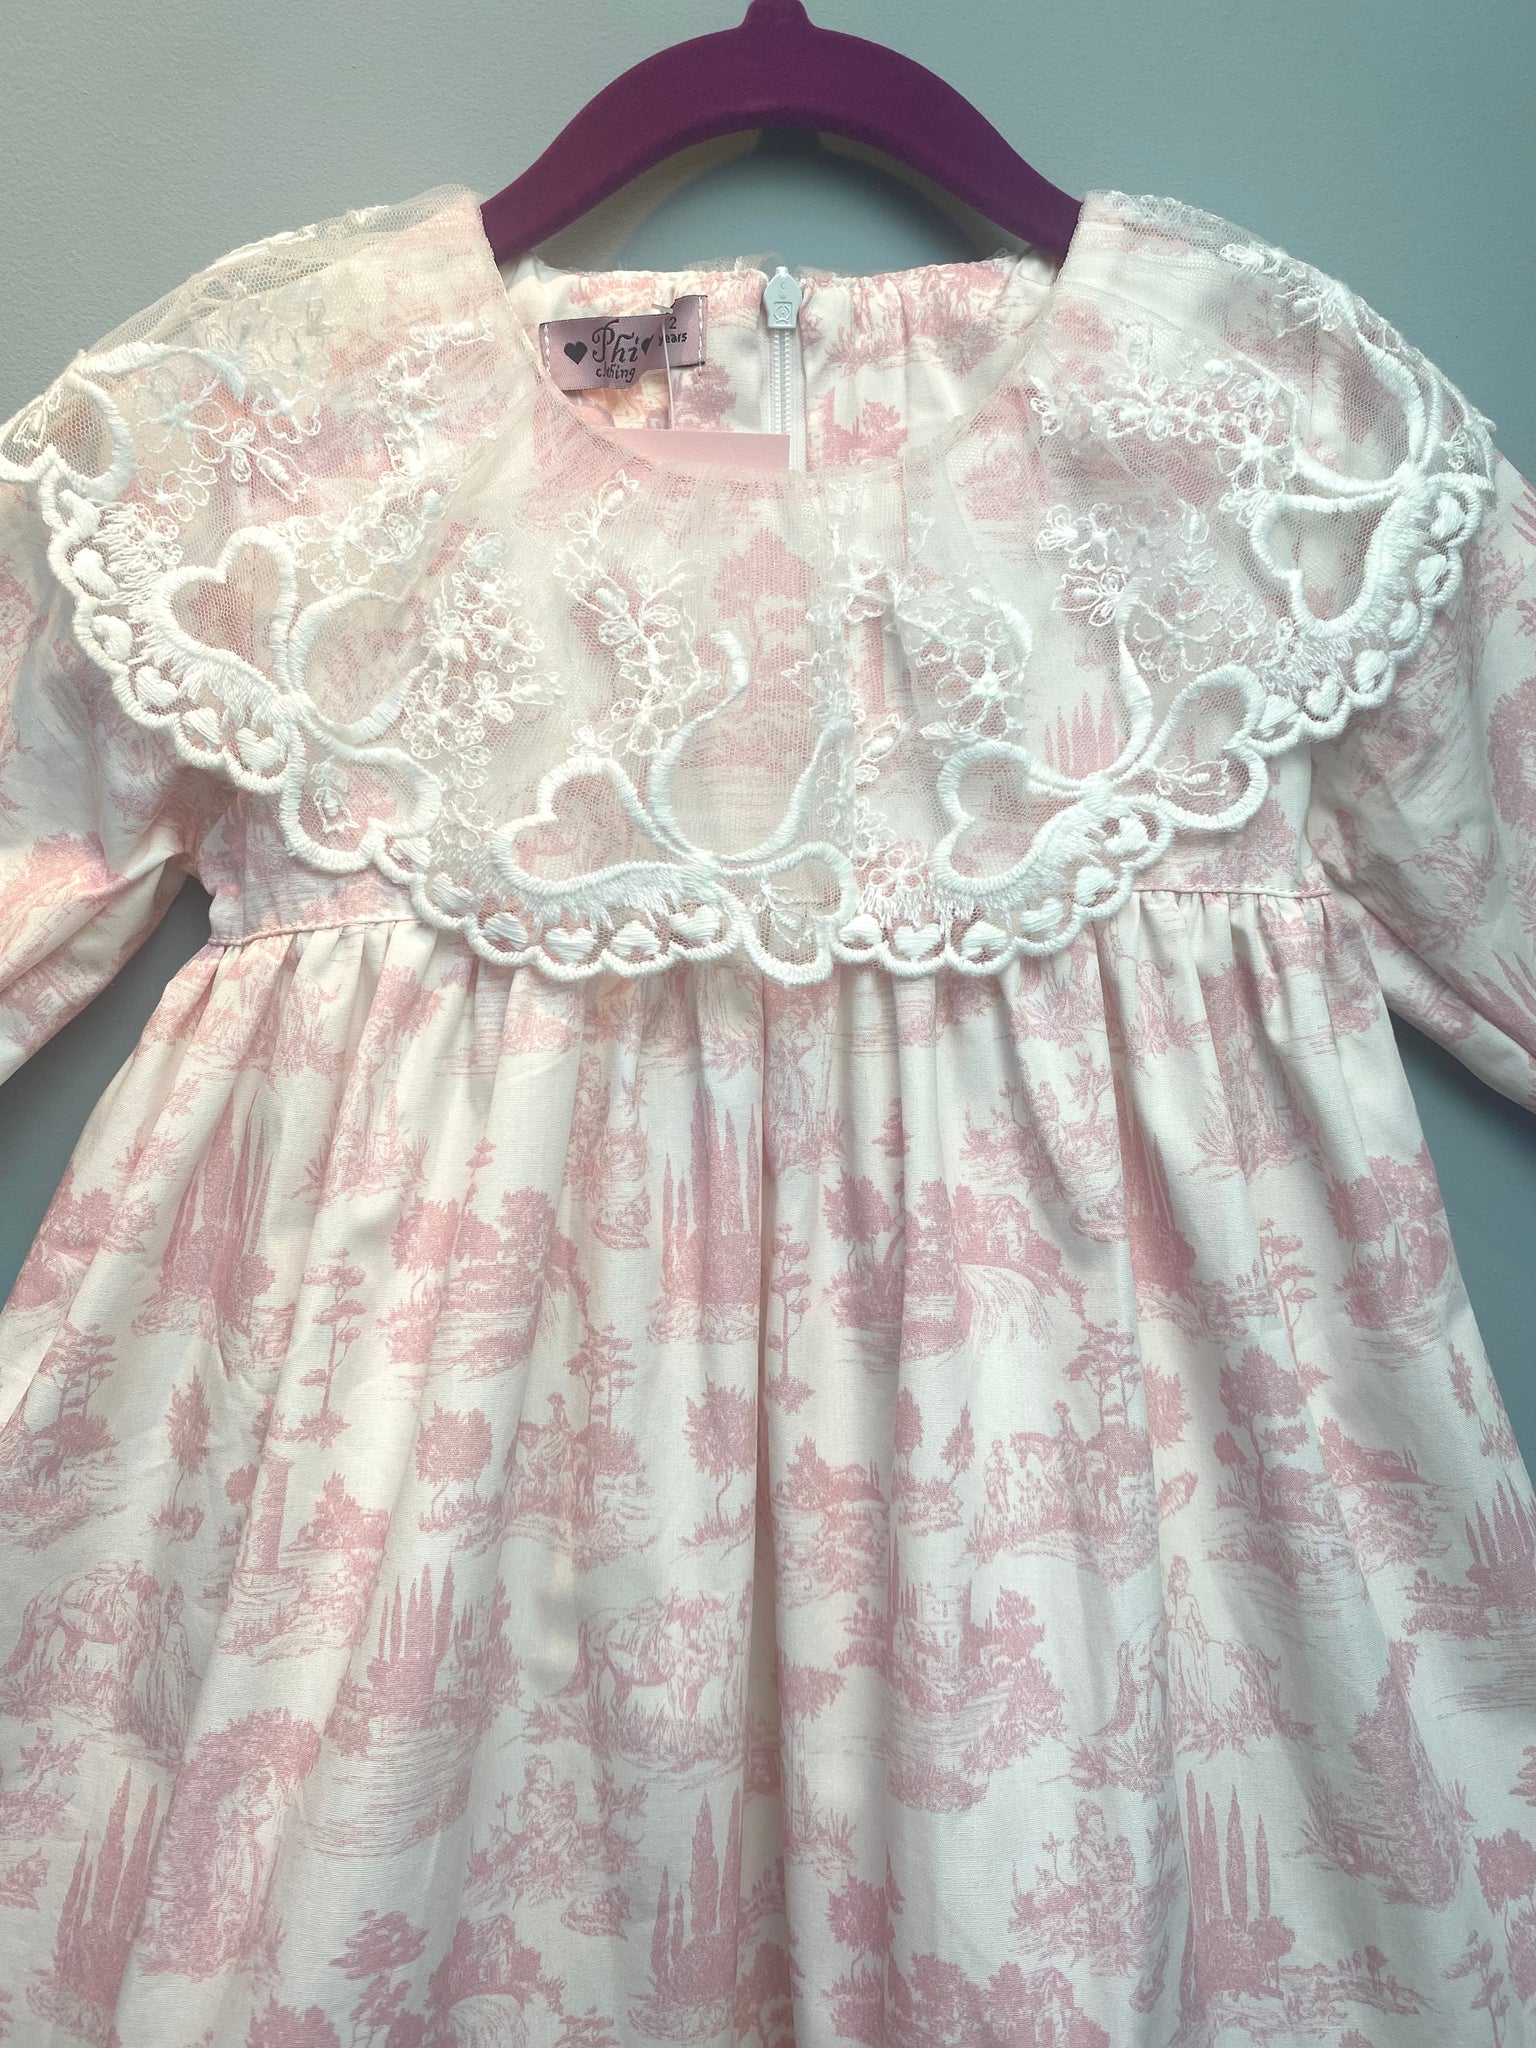 AW22 Phi Clothing Lillie & Friends Exclusive Pink & White ‘Toile de Jouy’ Lace Collared Dress